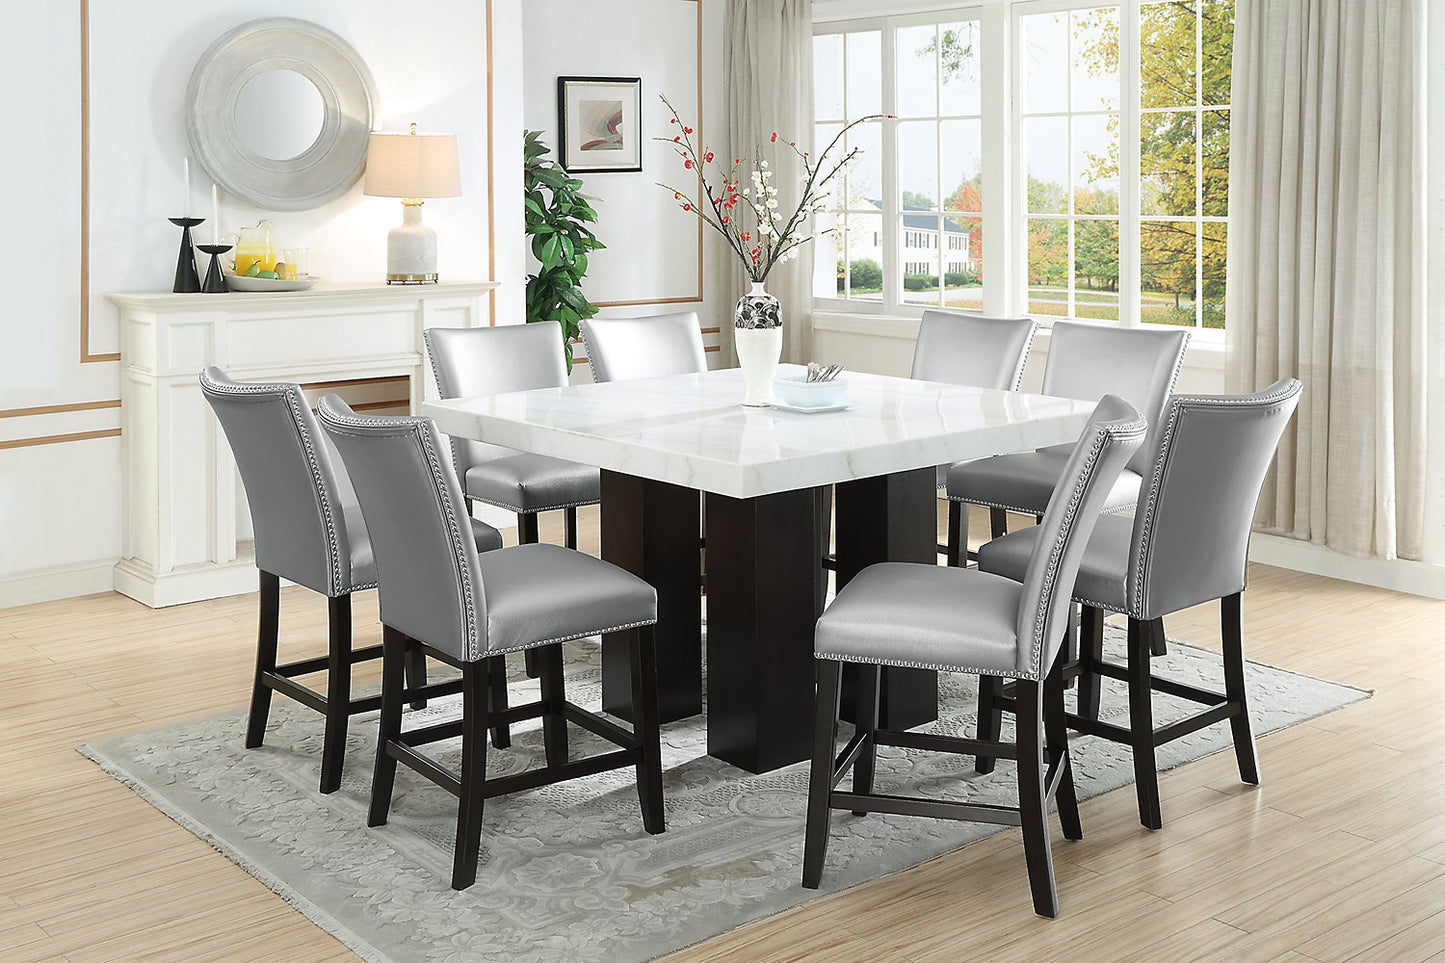 Westdale Counter-Height Dining Chair - Grey